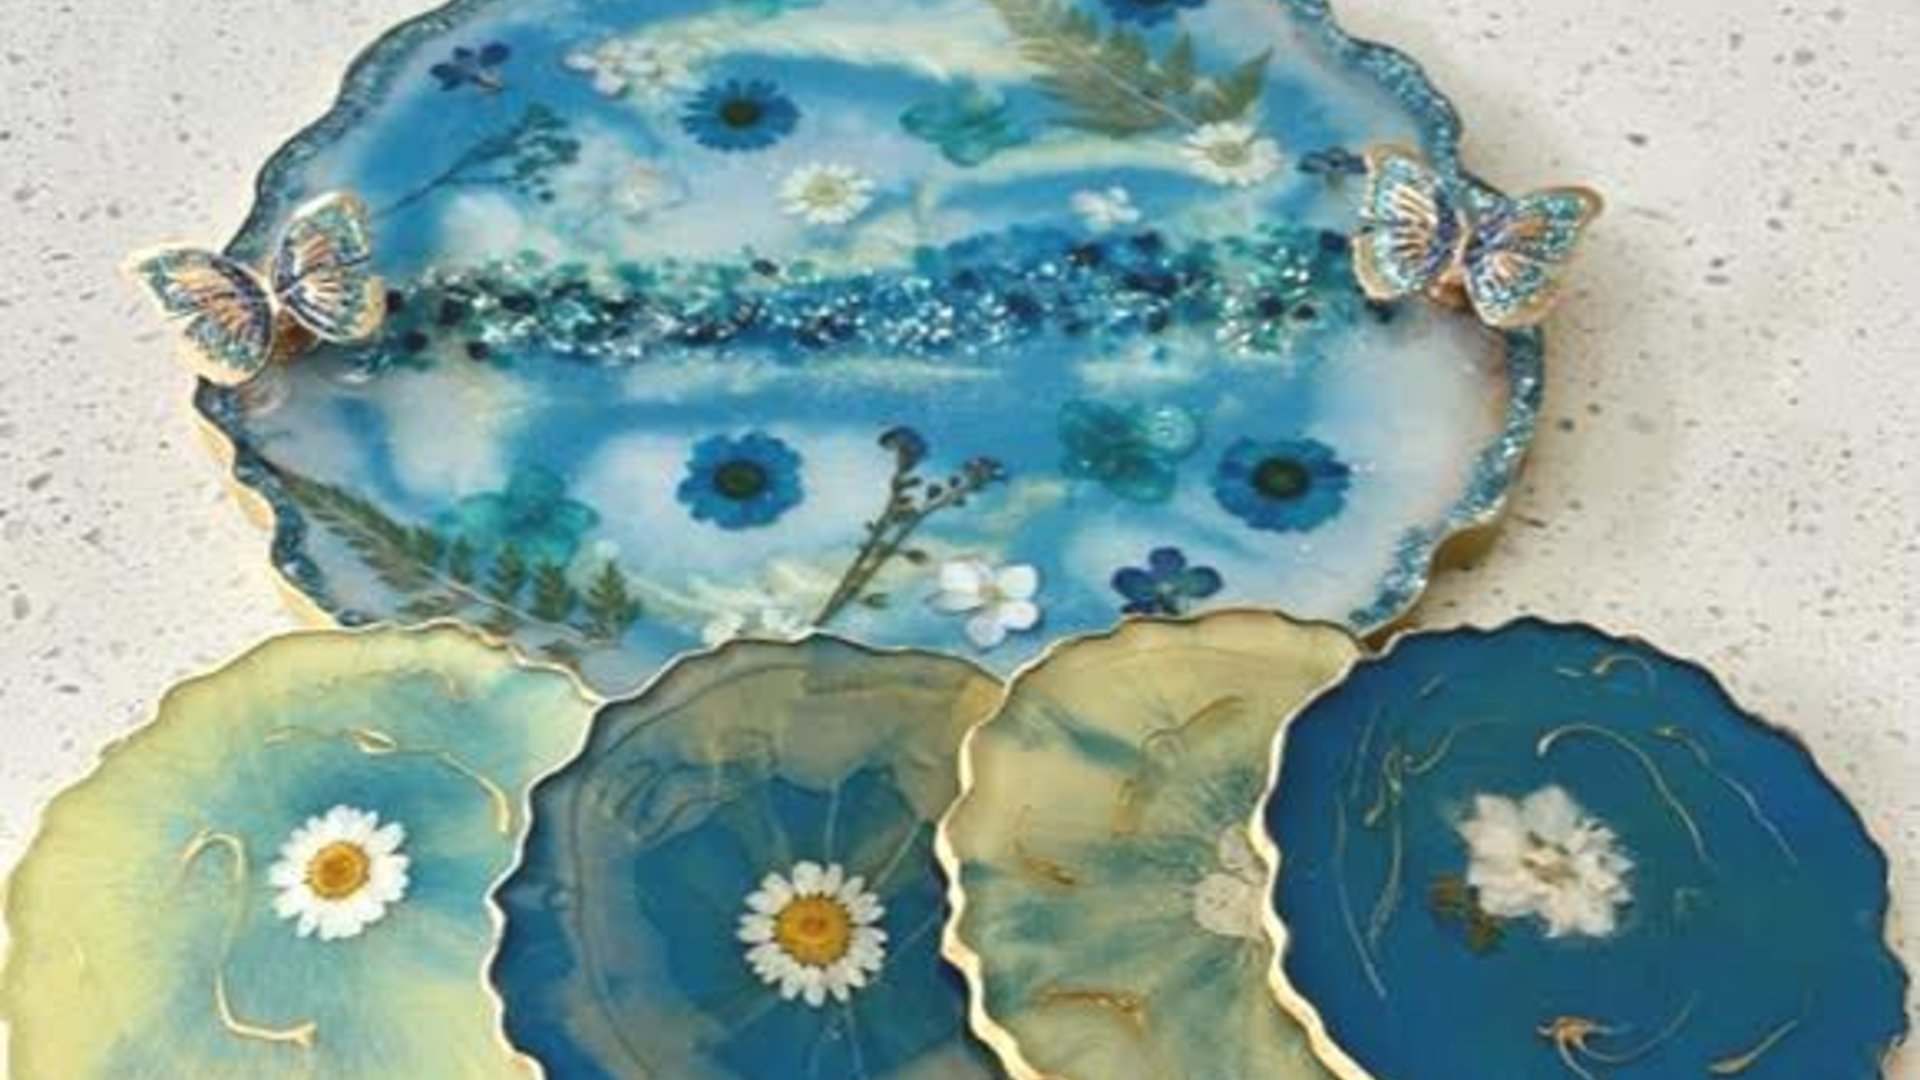 Celestial Flower Garden Serving Tray with Coasters